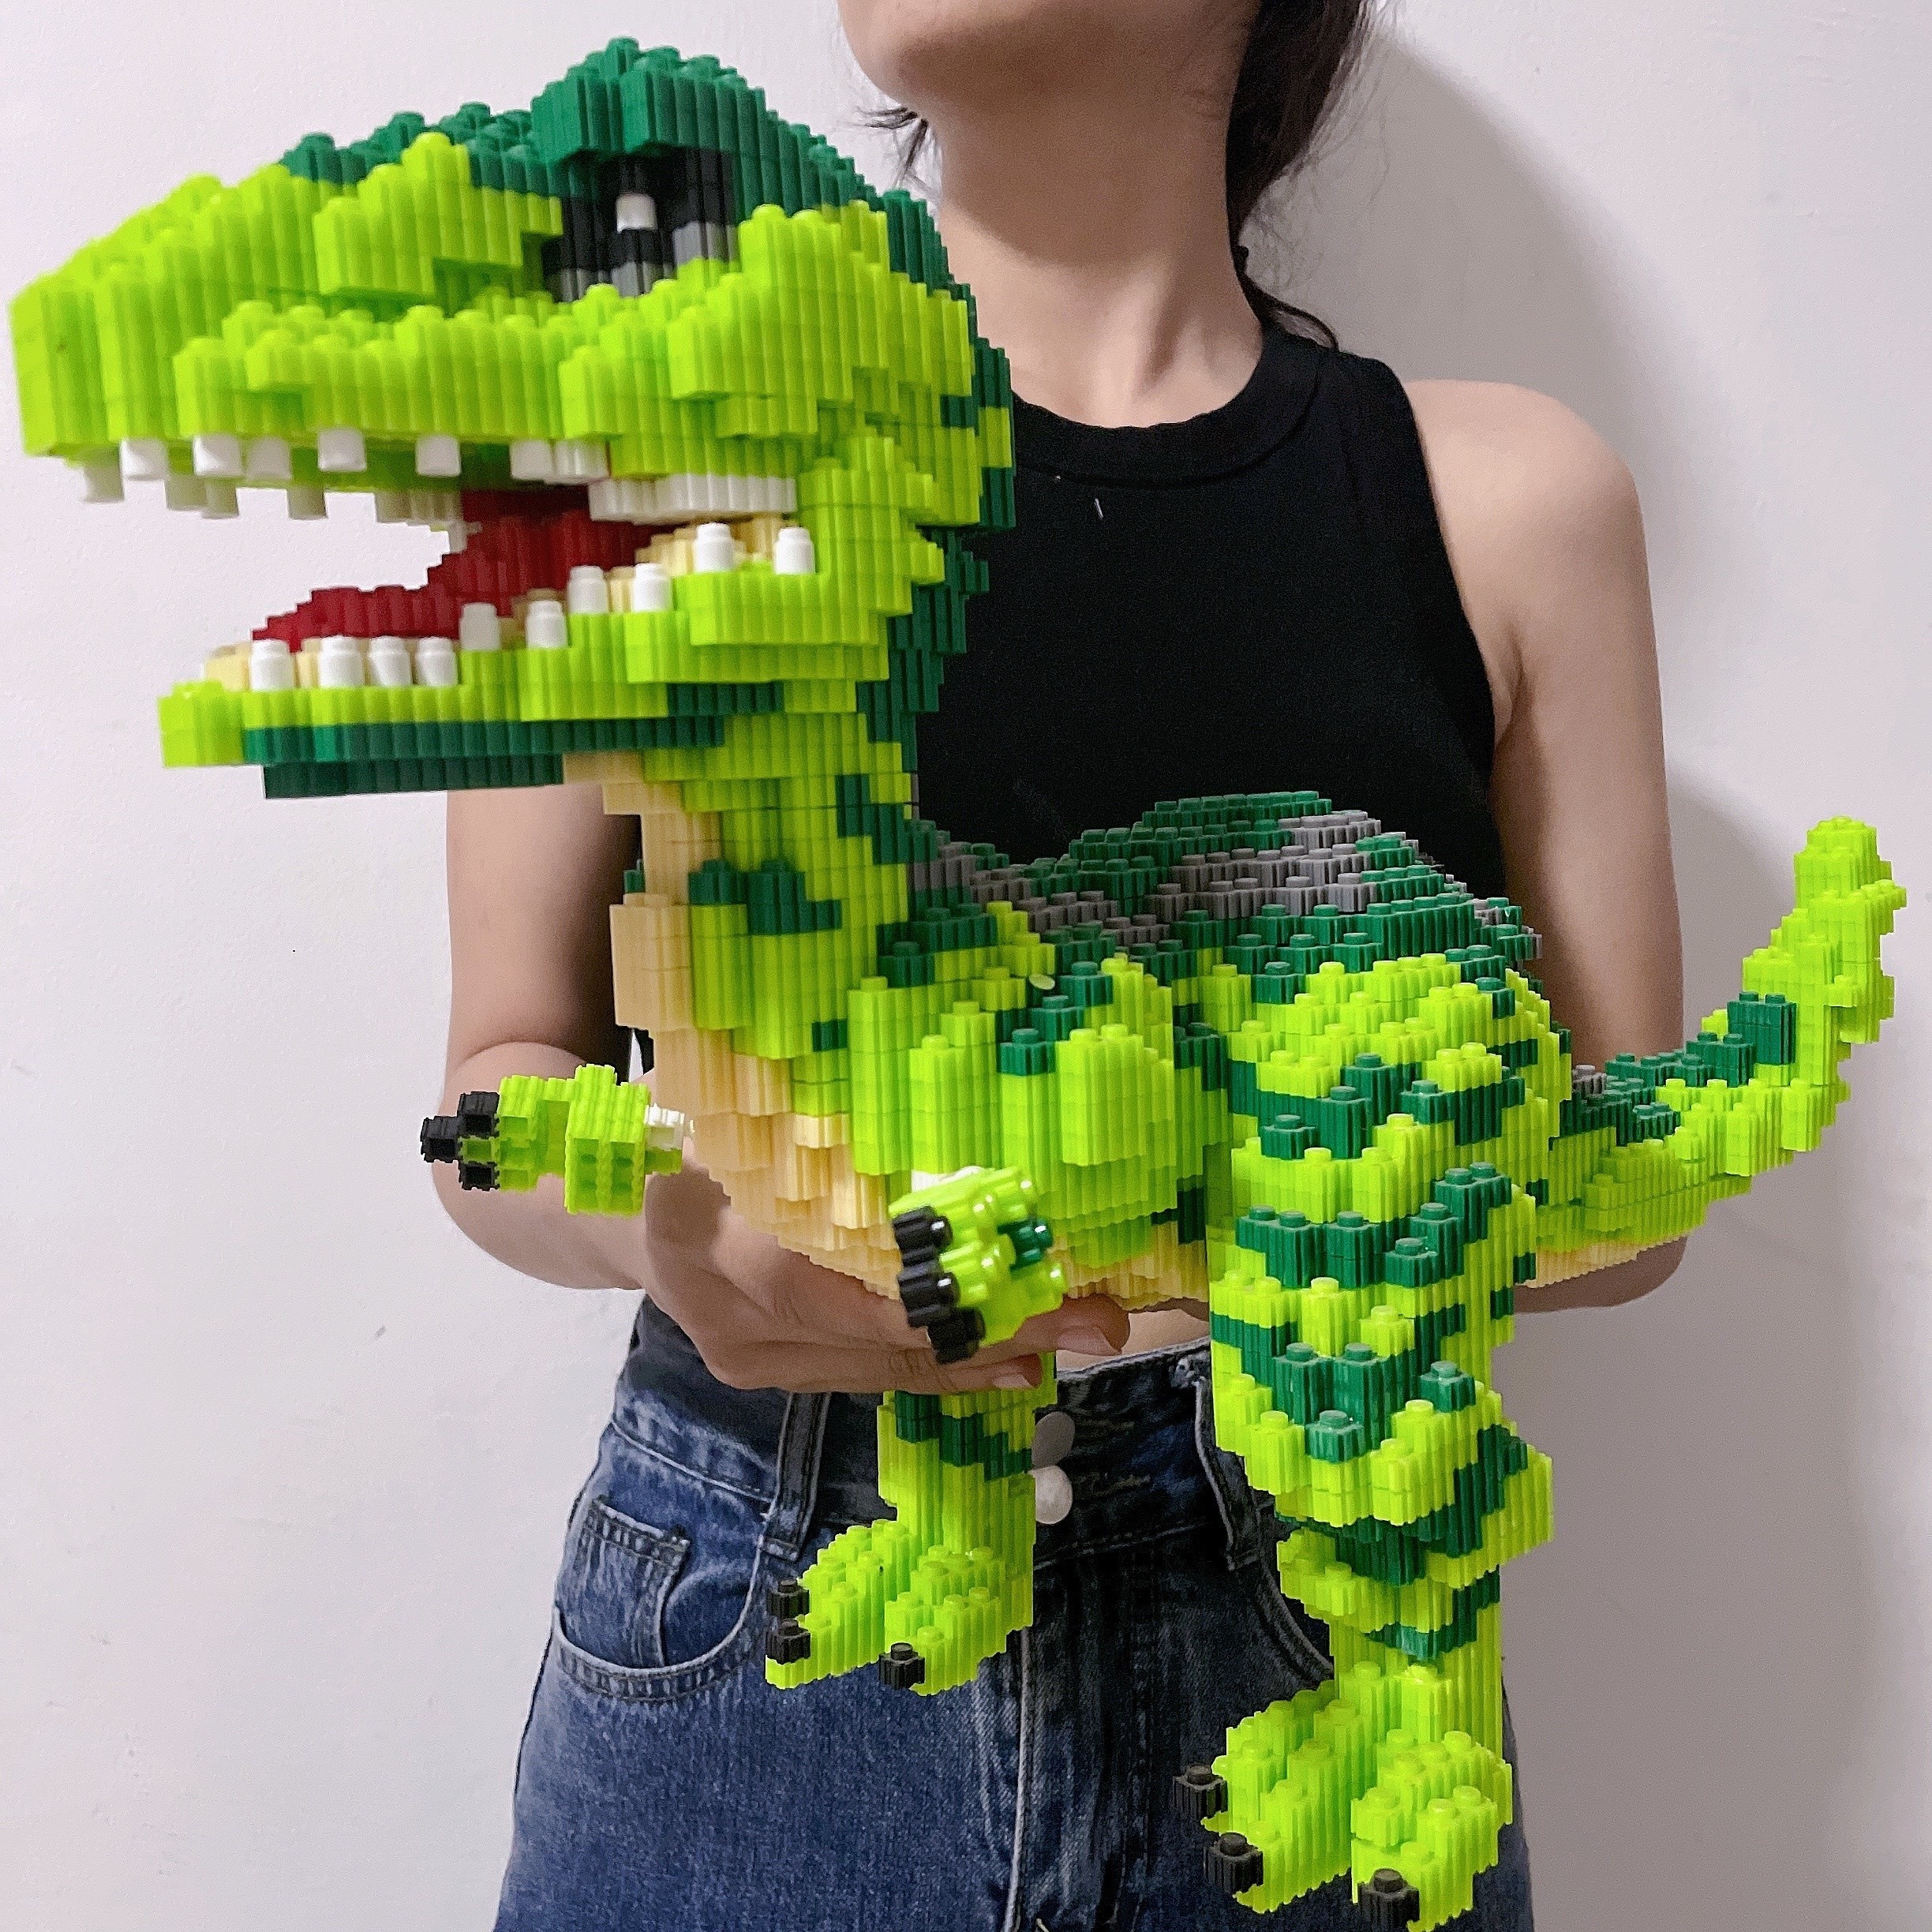 

3200pcs Dinosaur 3d Puzzle Building Blocks Kit - Diy Assembly Model Toy For Teens And Adults, Interactive Creative Craft Set, Ideal Gift For Birthday, Valentine's Day, Educational Collectible Display